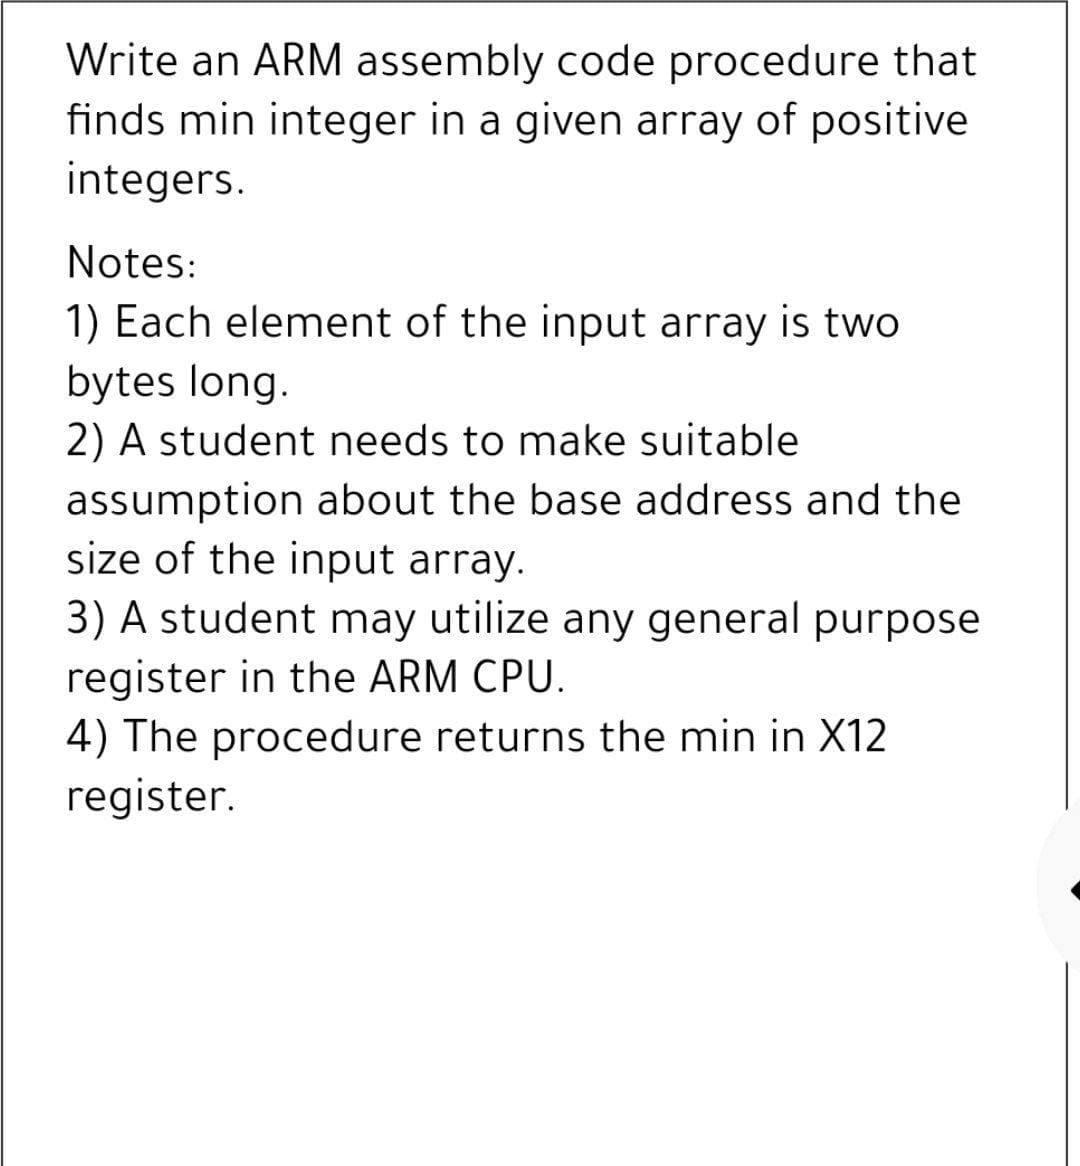 Write an ARM assembly code procedure that
finds min integer in a given array of positive
integers.
Notes:
1) Each element of the input array is two
bytes long.
2) A student needs to make suitable
assumption about the base address and the
size of the input array.
3) A student may utilize any general purpose
register in the ARM CPU.
4) The procedure returns the min in X12
register.
